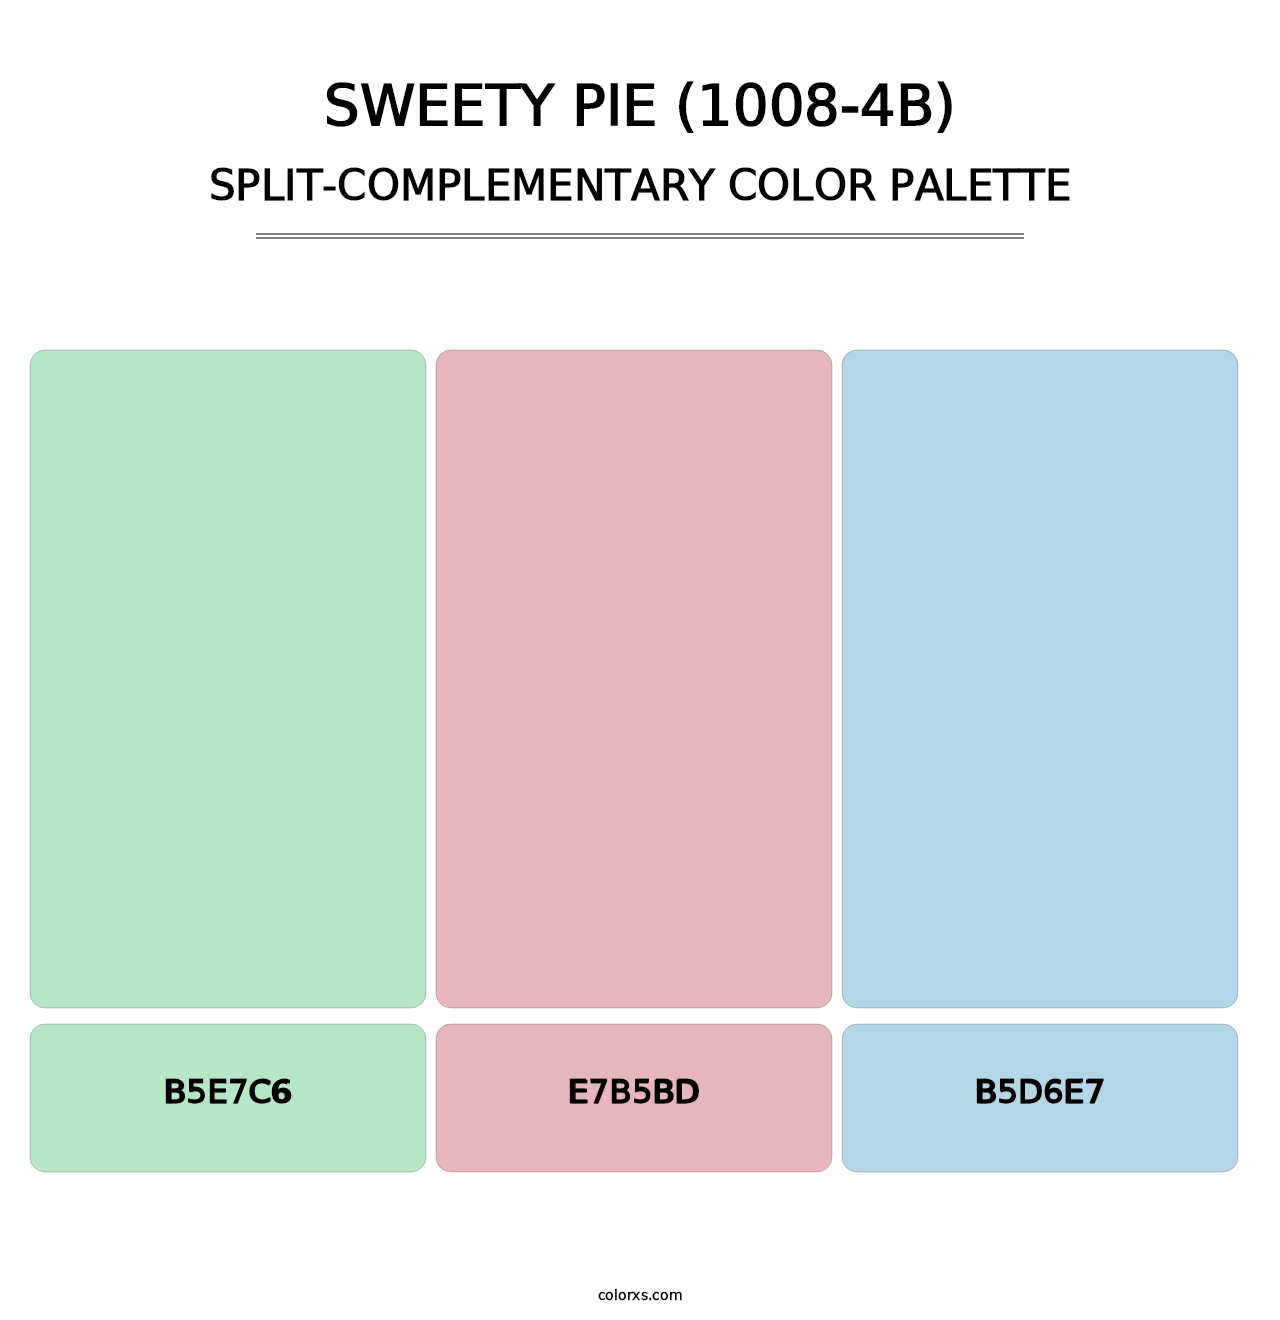 Sweety Pie (1008-4B) - Split-Complementary Color Palette